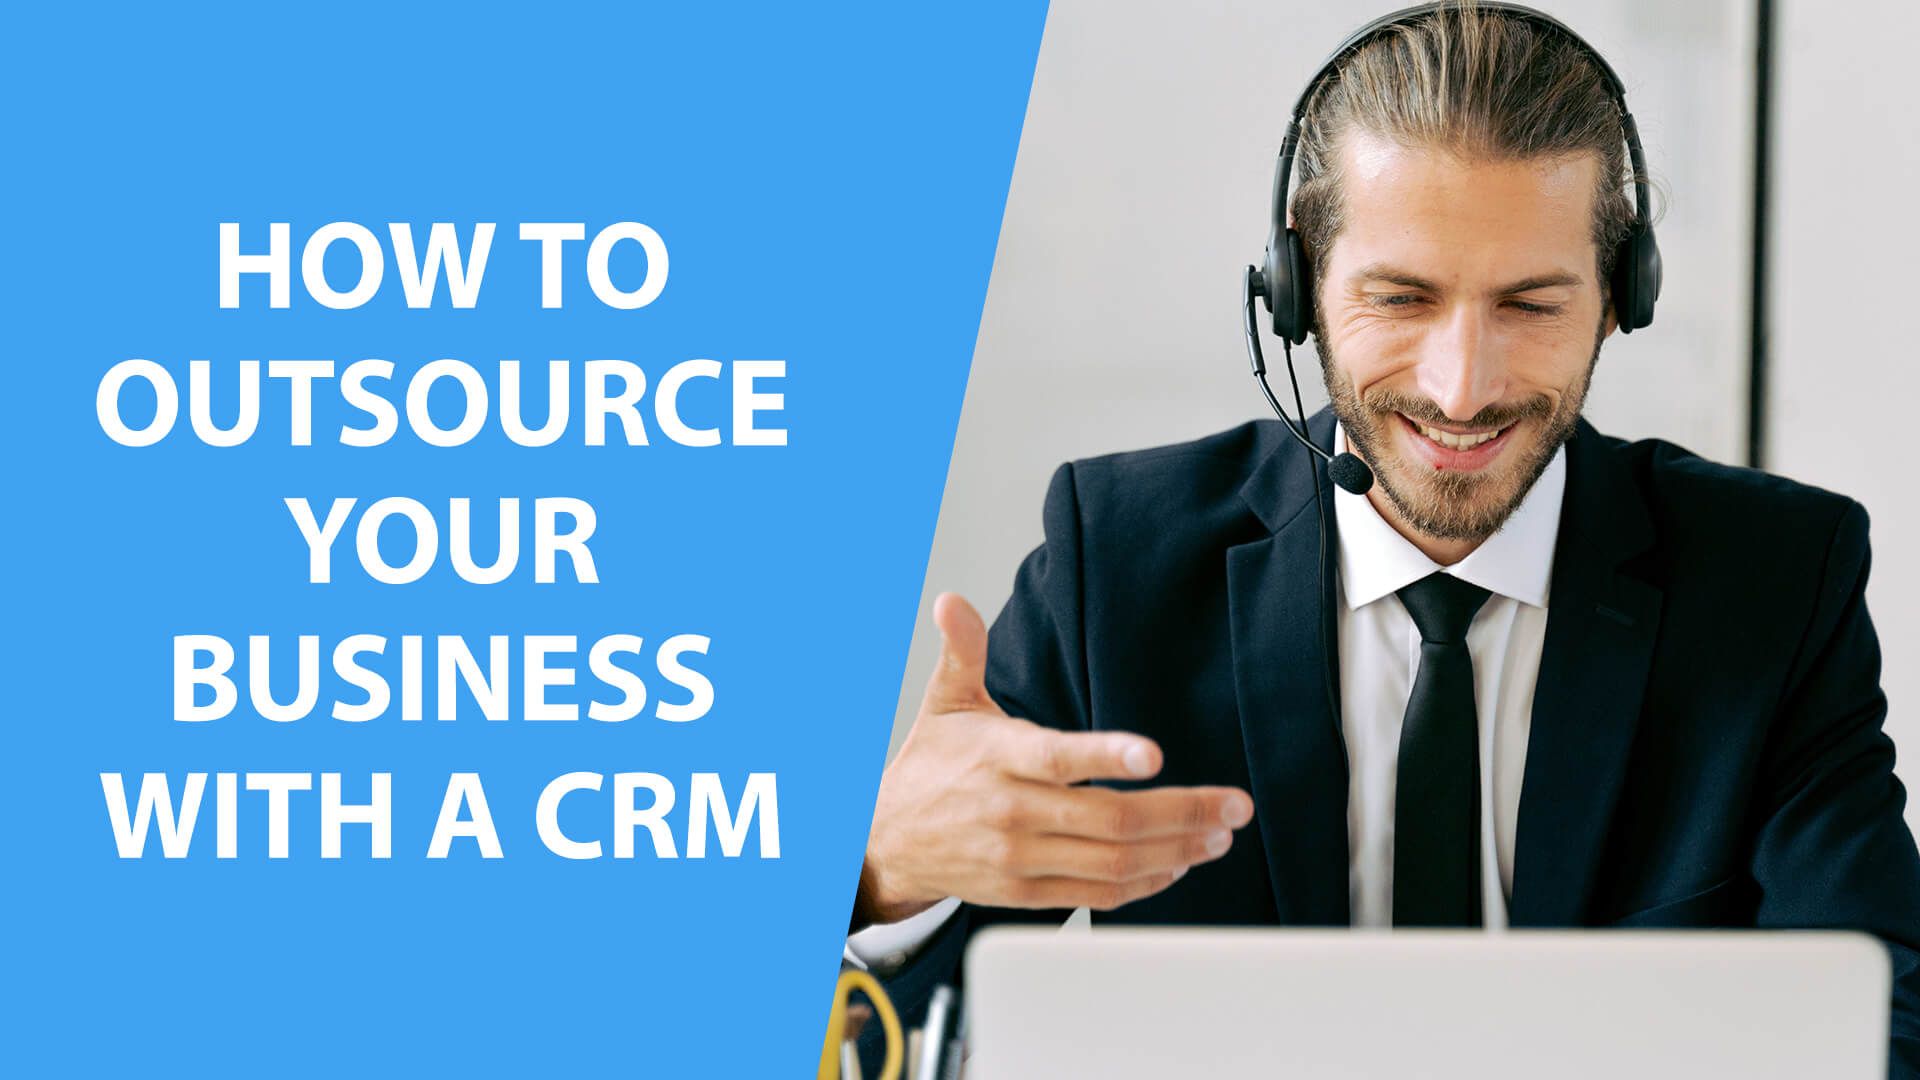 How To Outsource Your Business With a CRM